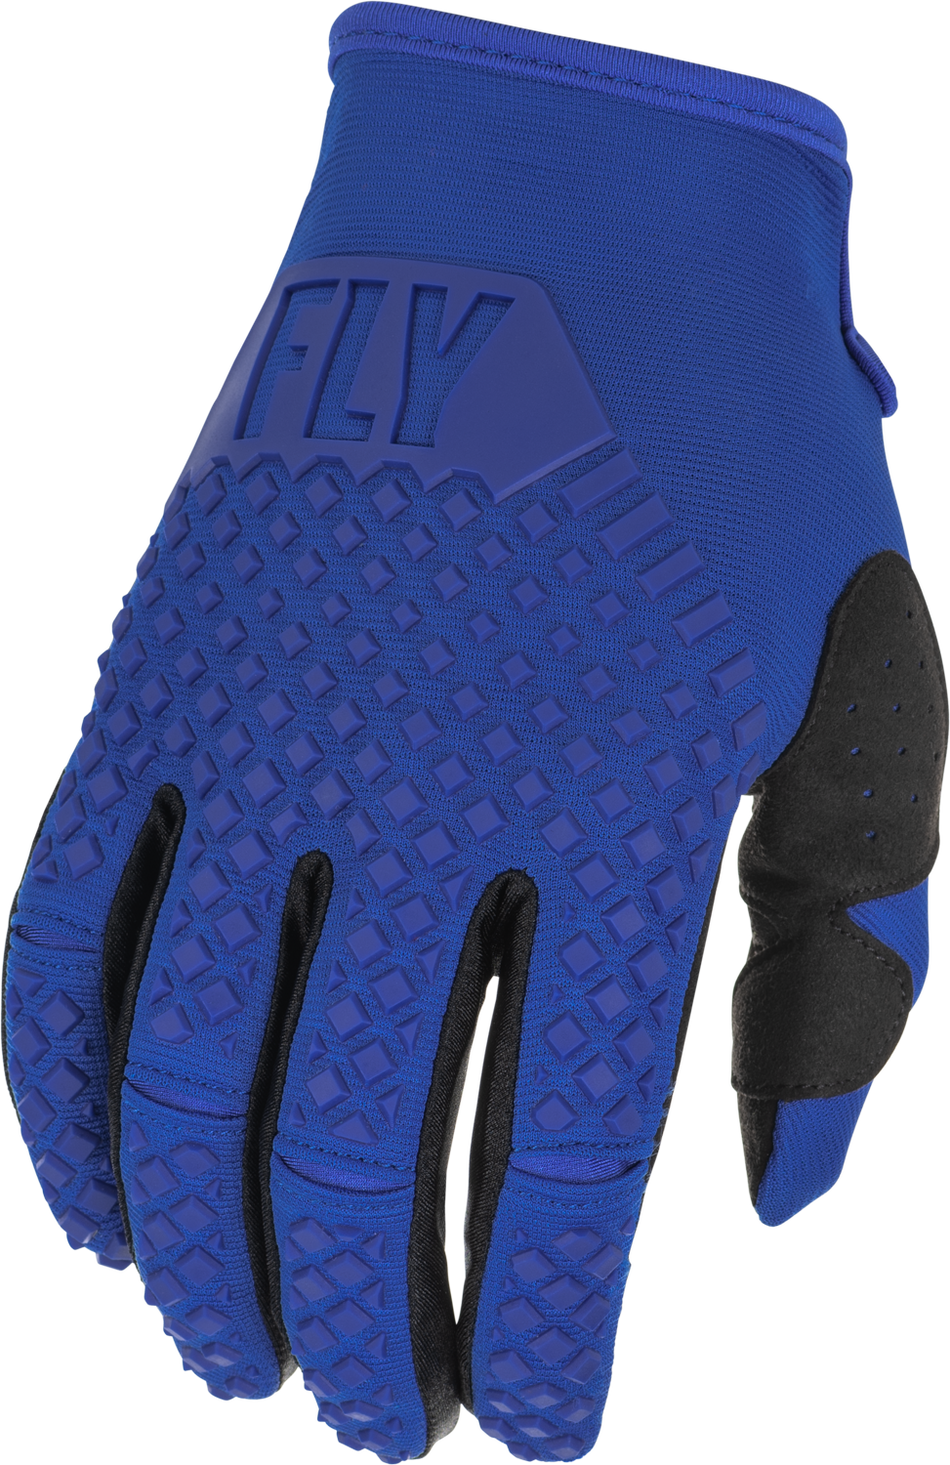 FLY RACING Kinetic Gloves Blue Md 375-411M